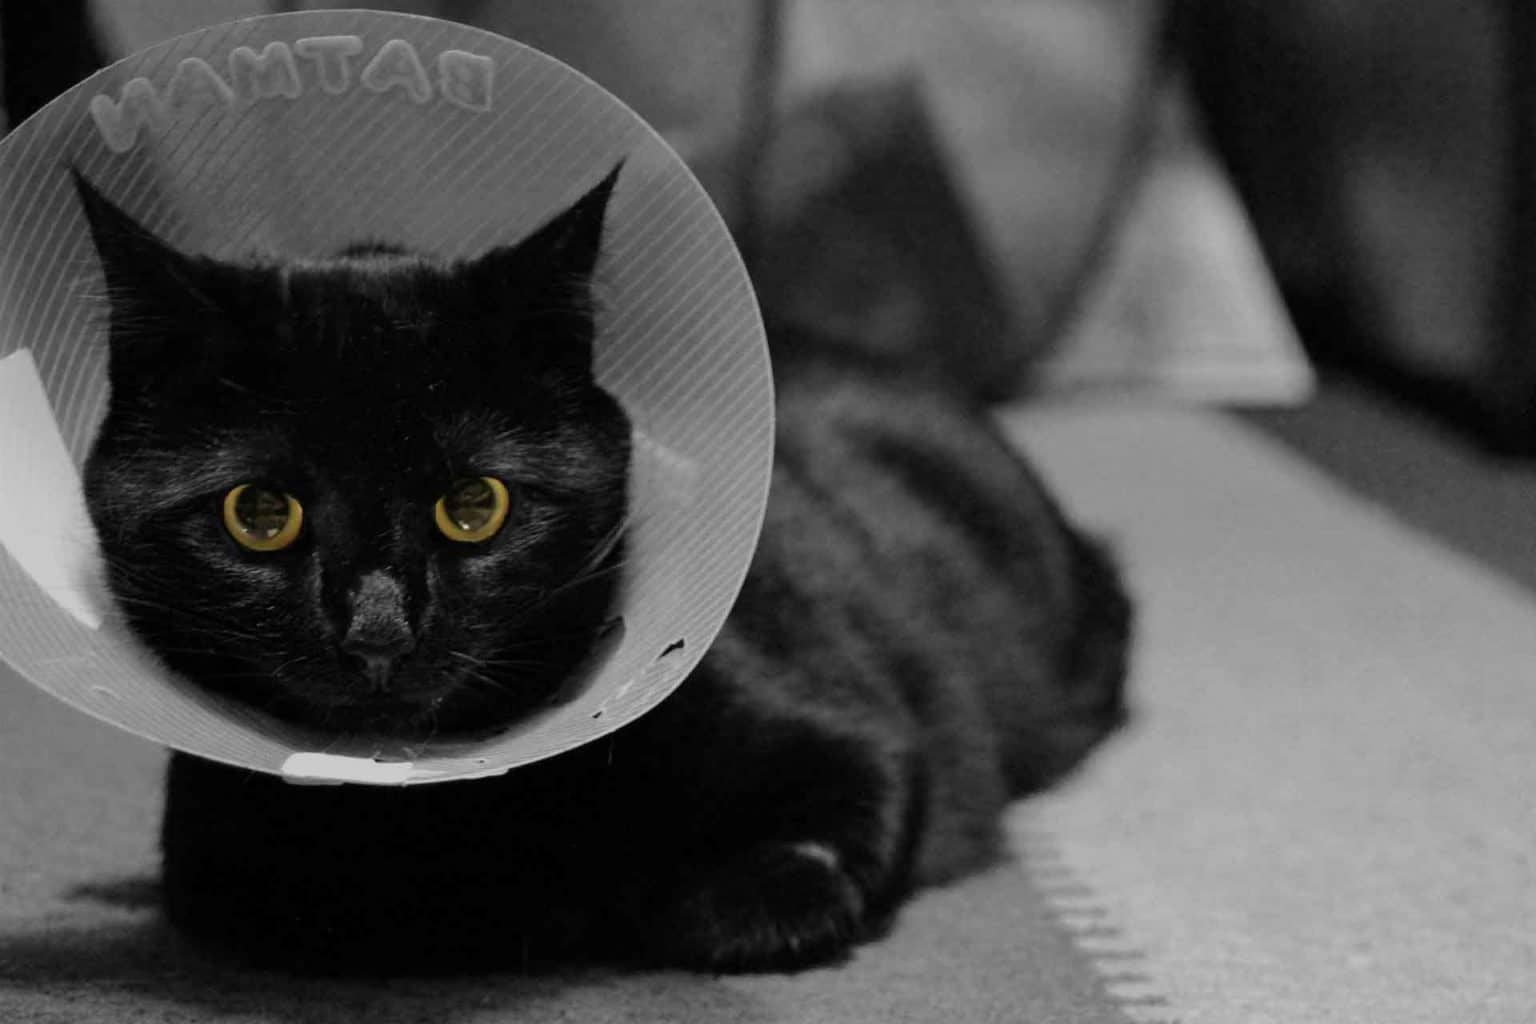 How Long Should a Cat Wear a Cone After Being Neutered?